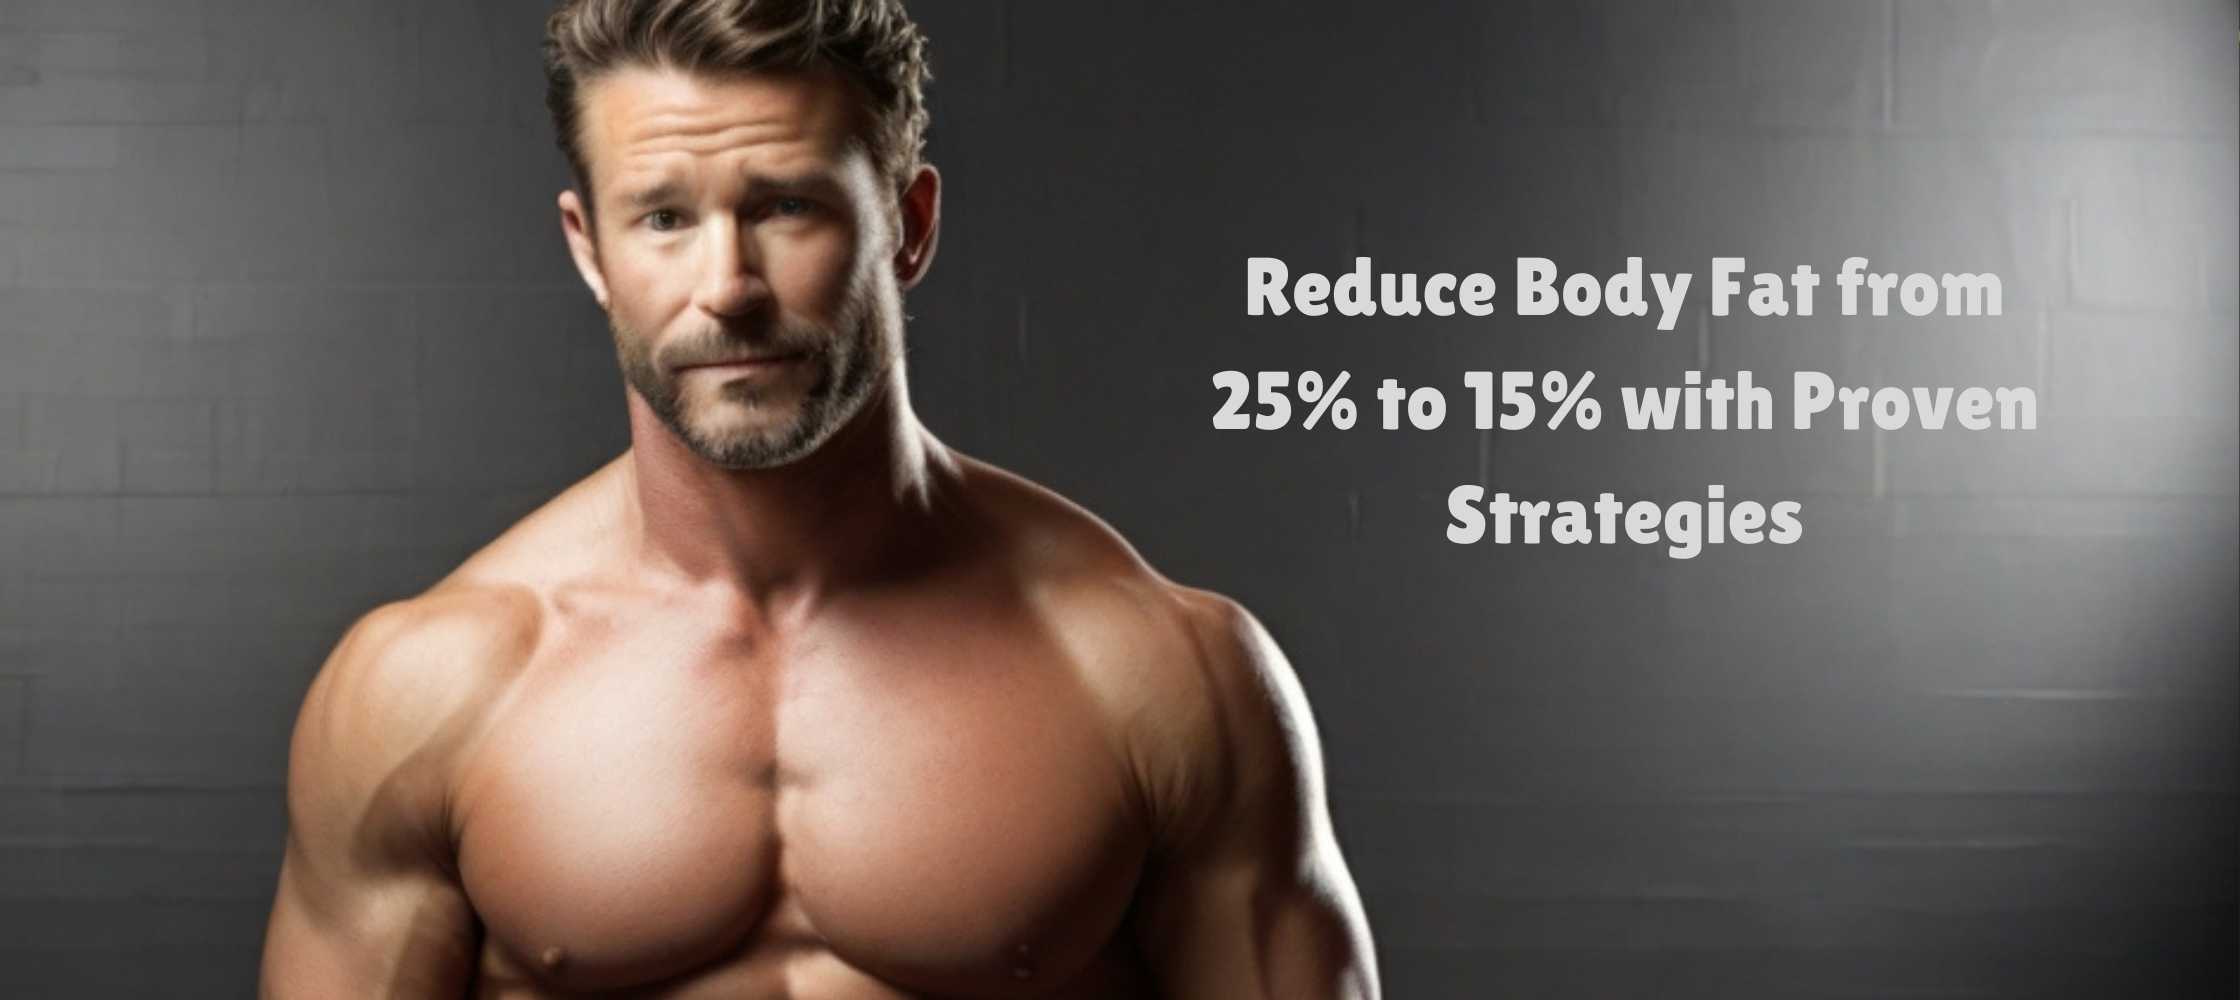 Reduce Body Fat from 25% to 15% with Proven Strategies